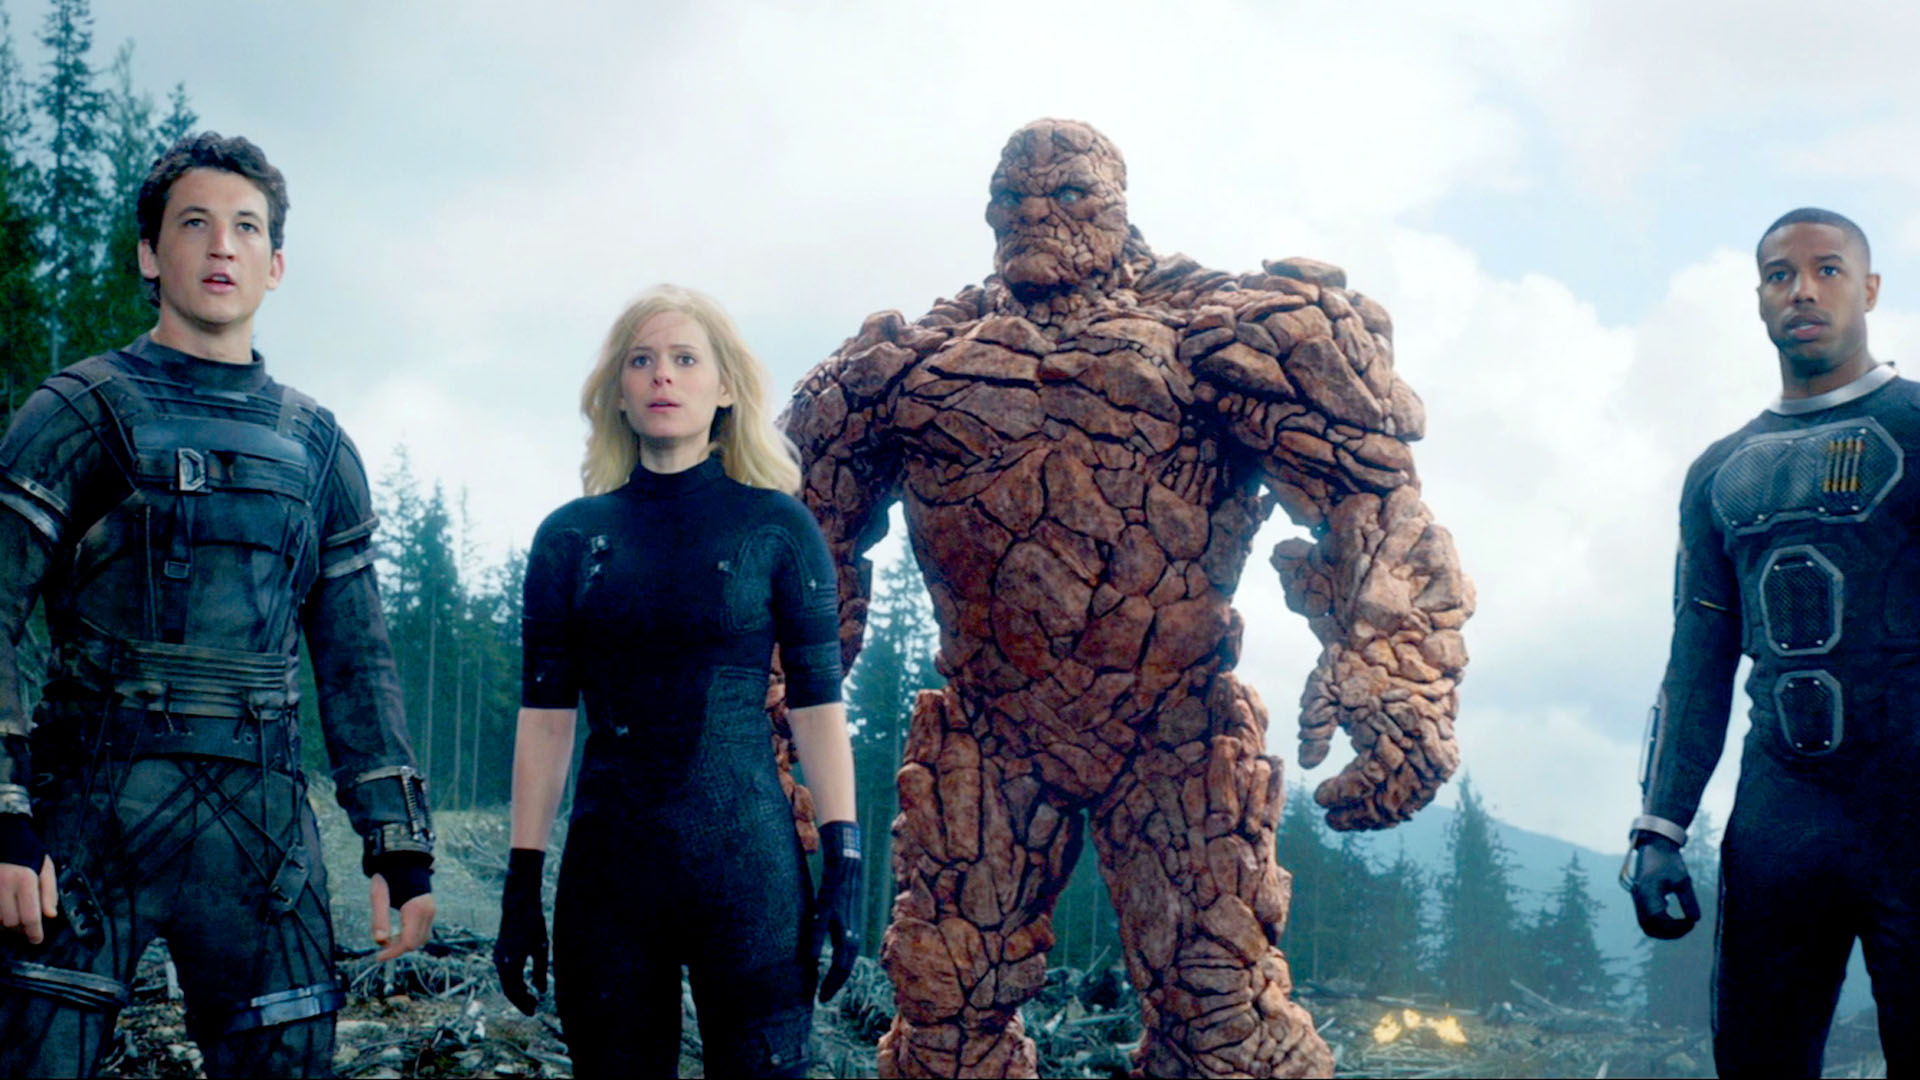 Upcoming Marvel Movie Update: 'Fantastic Four' Reboot - Cast, Release Date, and What to Expect in MCU Phase 6